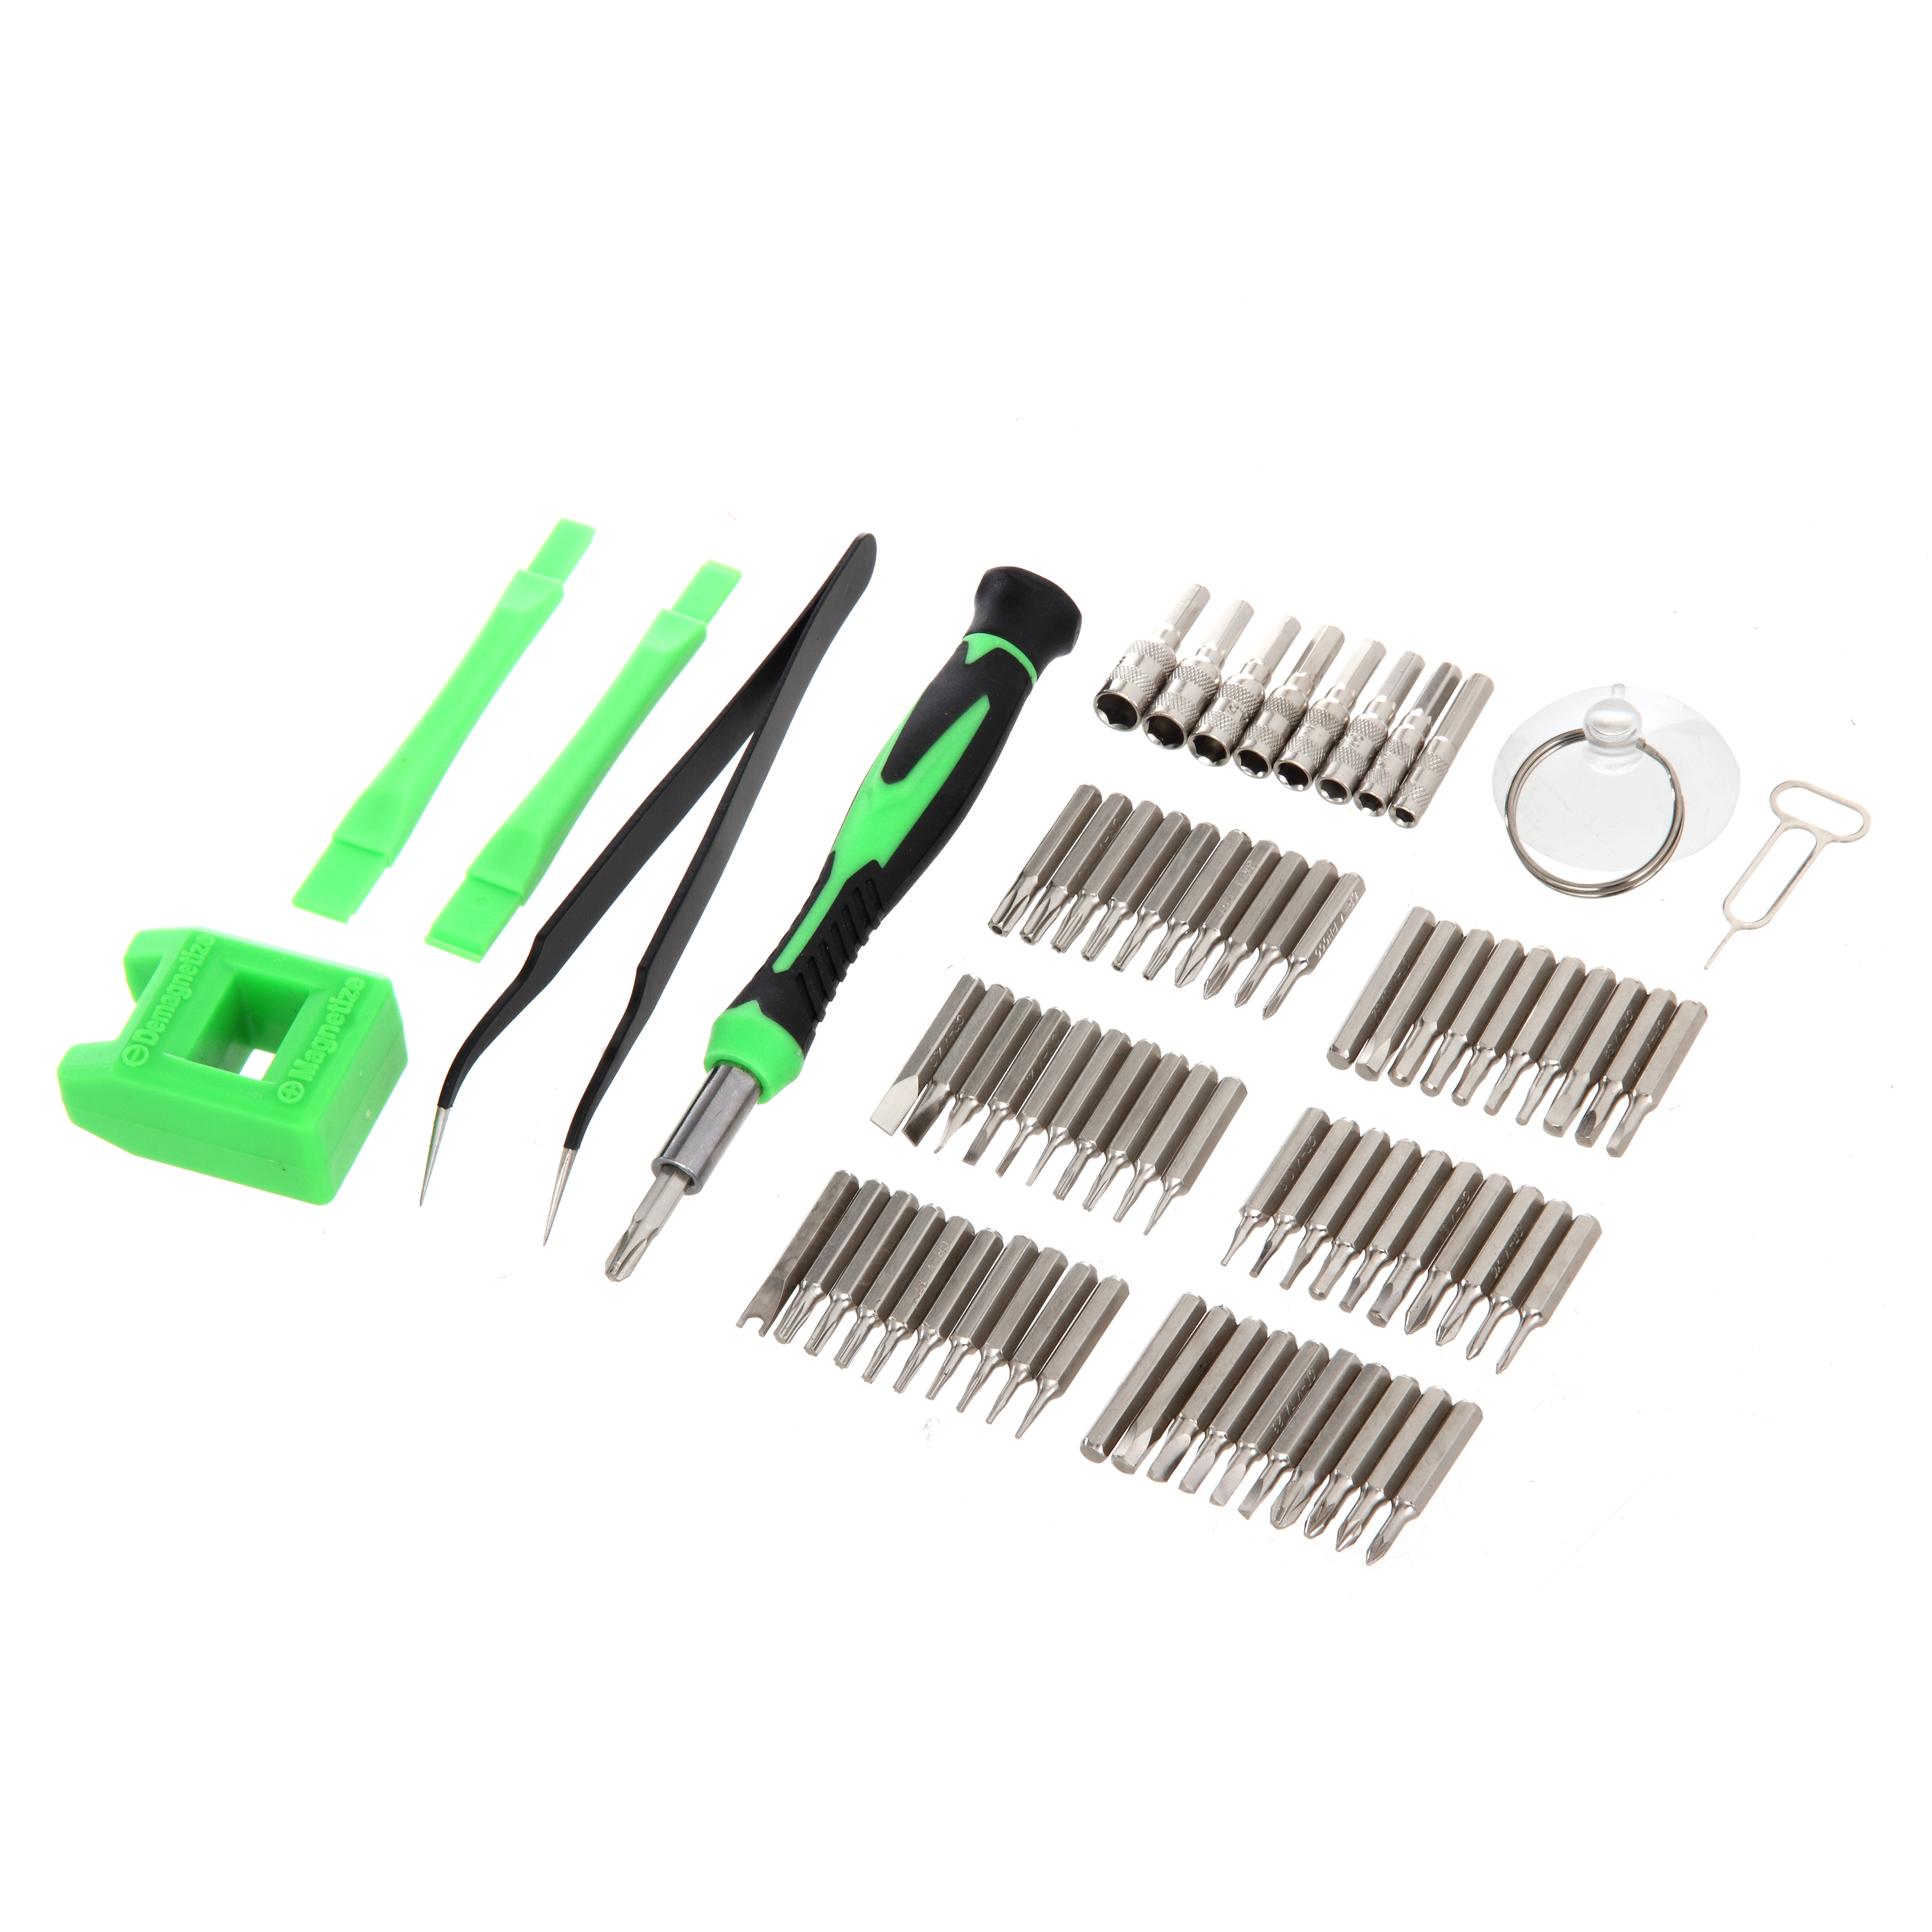 Hyper Tough 77 Piece Computer Repair Kit with Precision Bits and Storage Case TS85134A - image 5 of 9